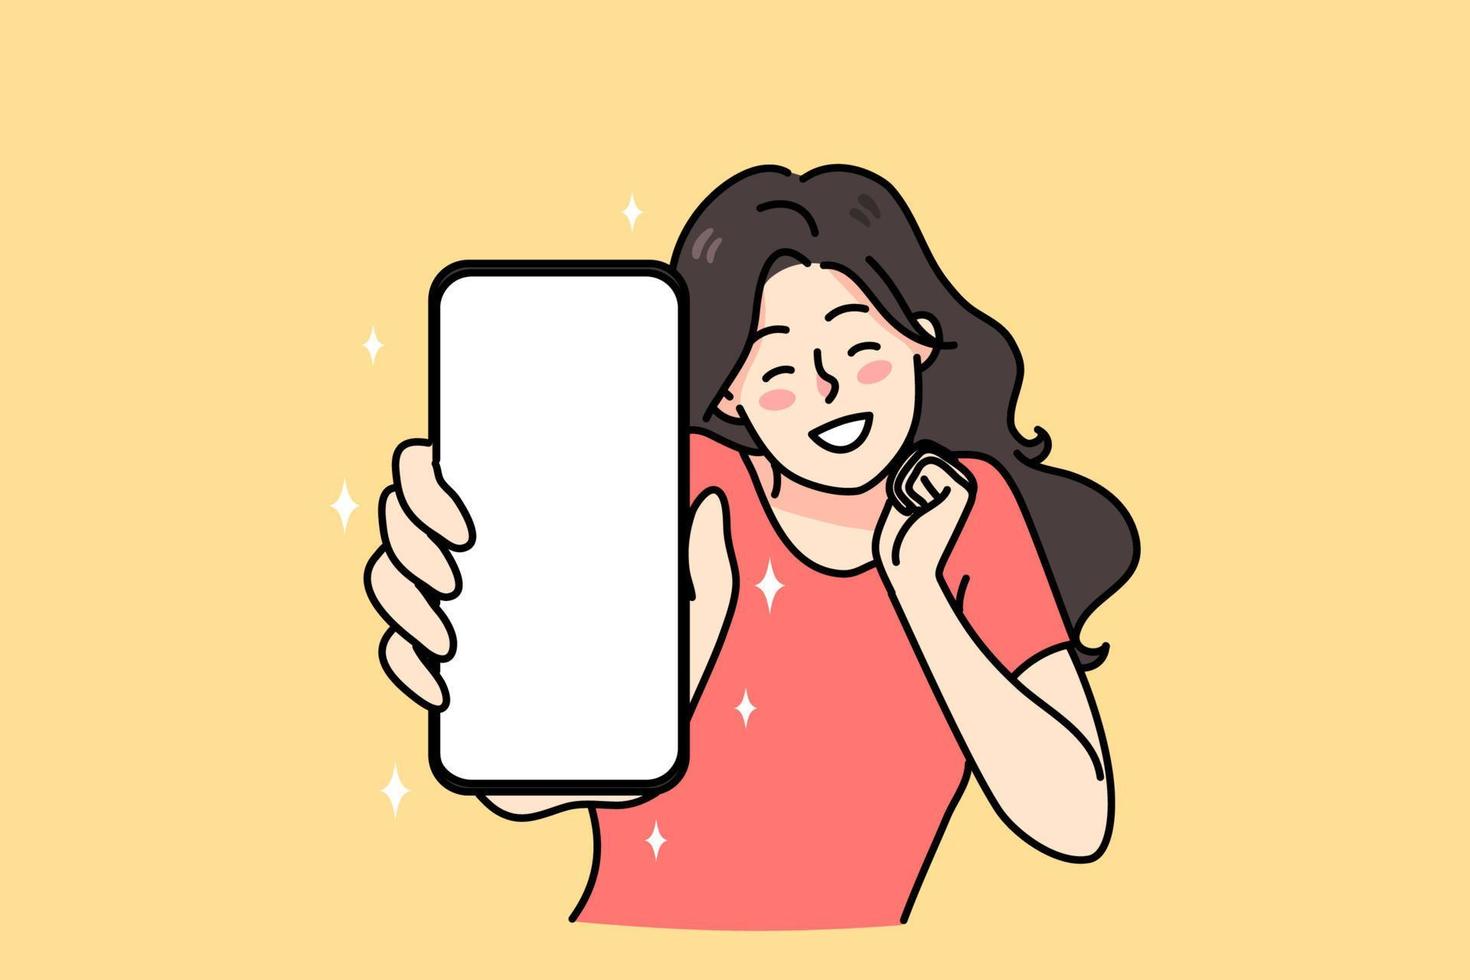 Overjoyed young woman show cellphone with blank mockup screen excited about good news online. Smiling girl demonstrate smartphone, win lottery or get great deal or sale. Vector illustration.